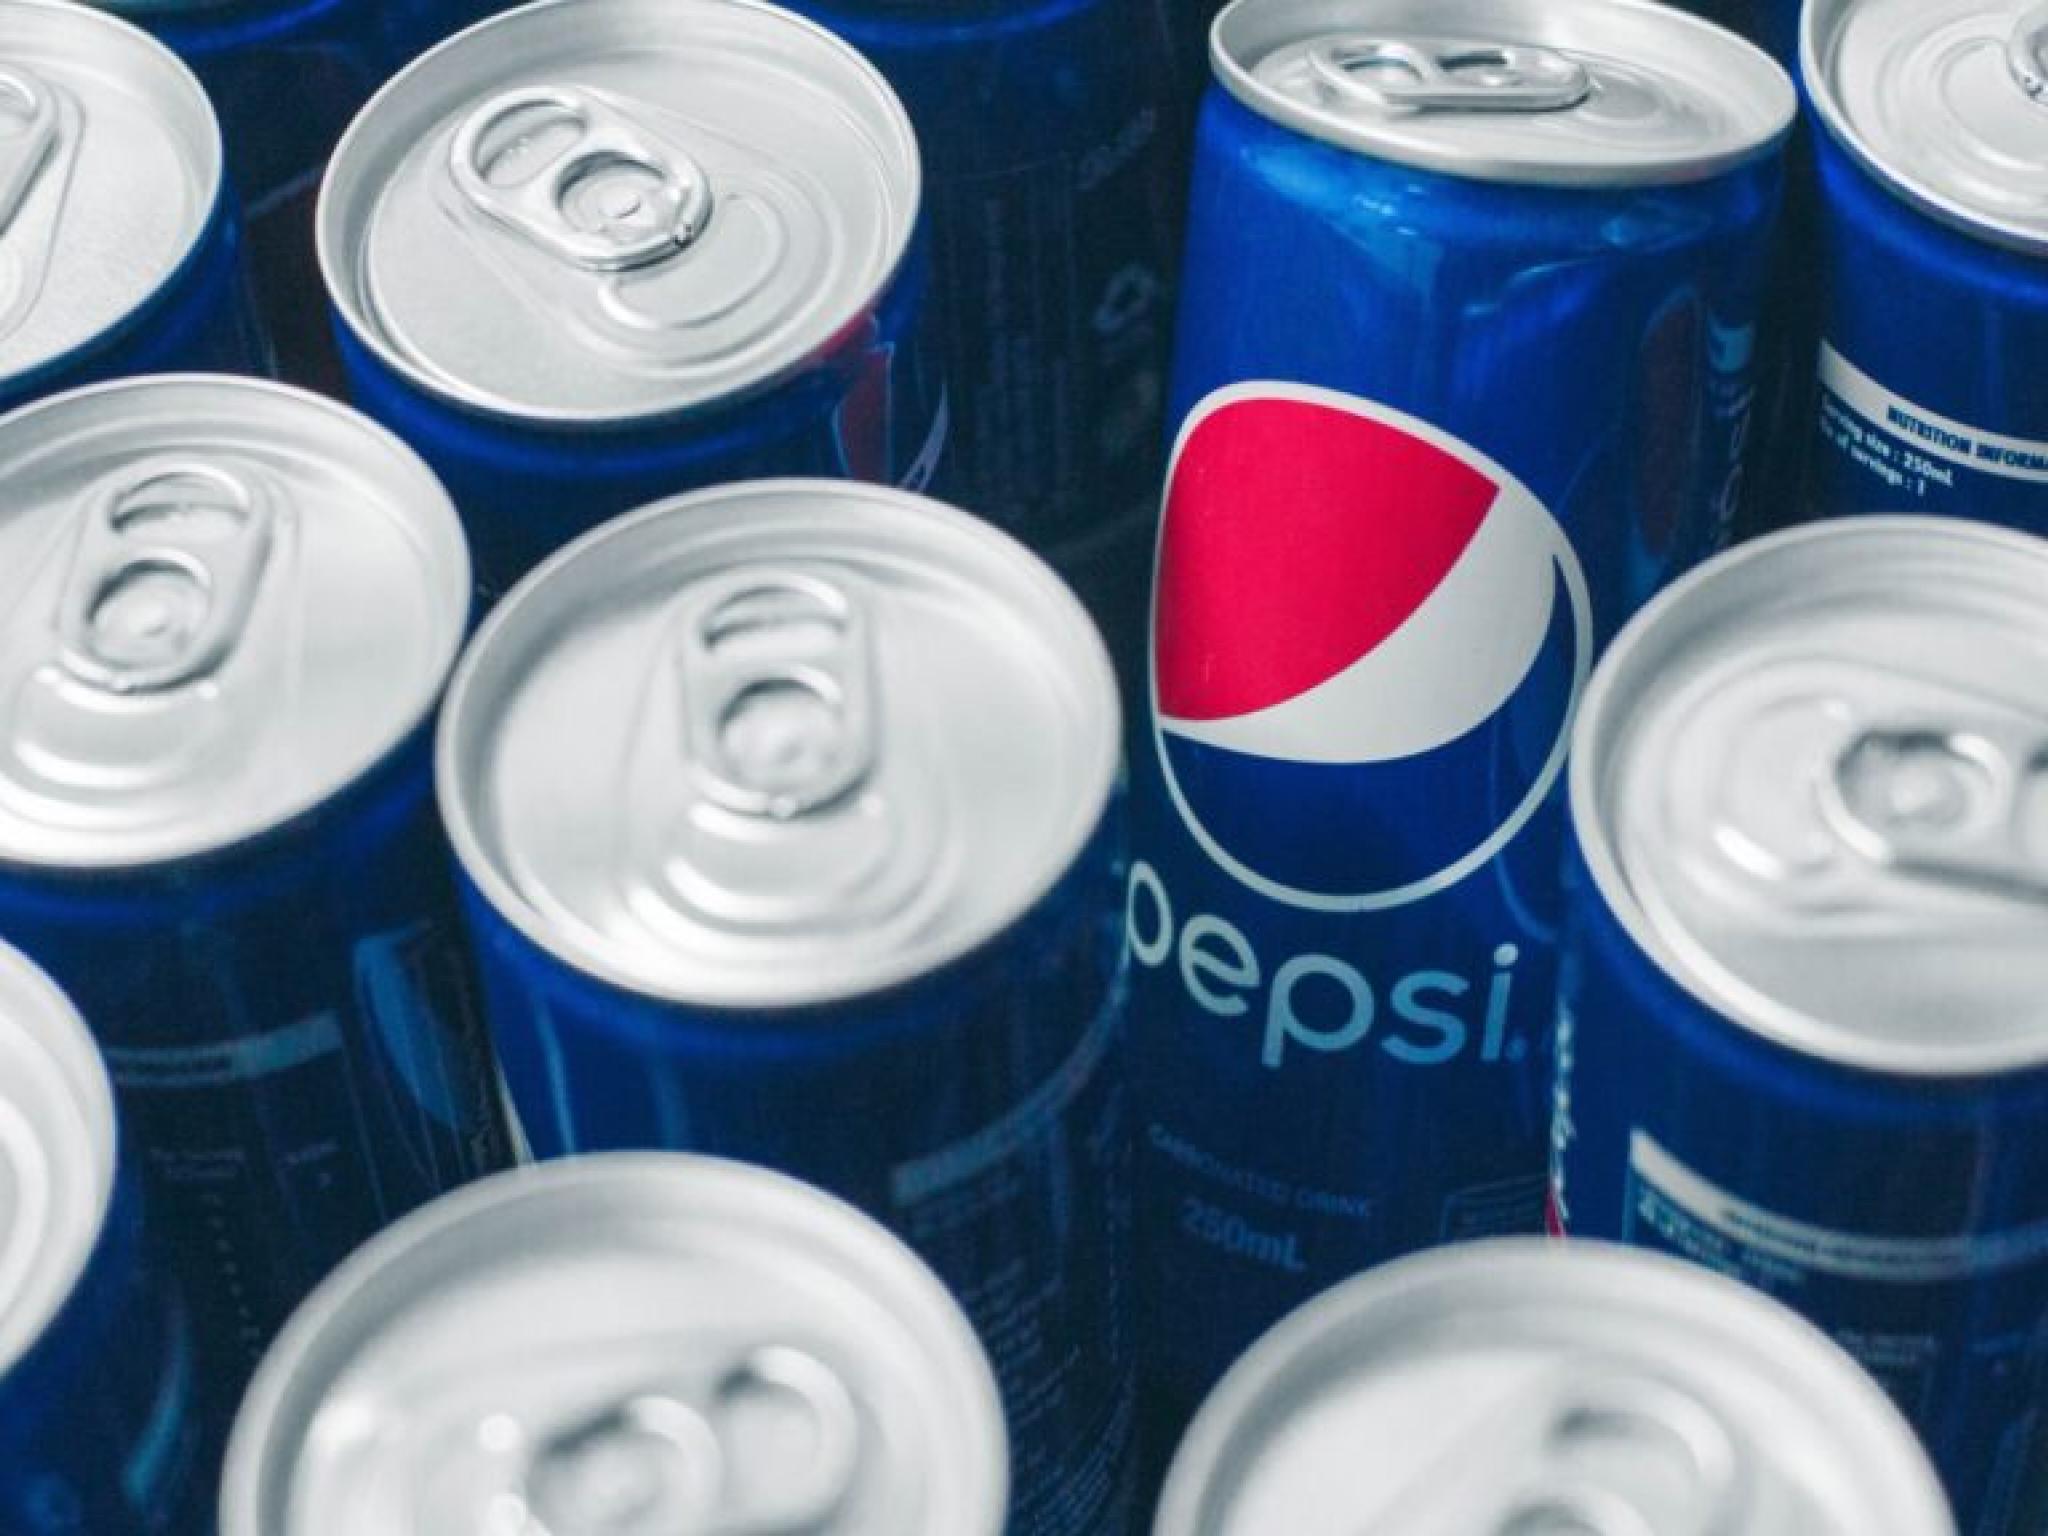  pepsi-stock-chart-looks-bullish-ahead-of-q1-earnings-but-analysts-are-cautious-corrected 